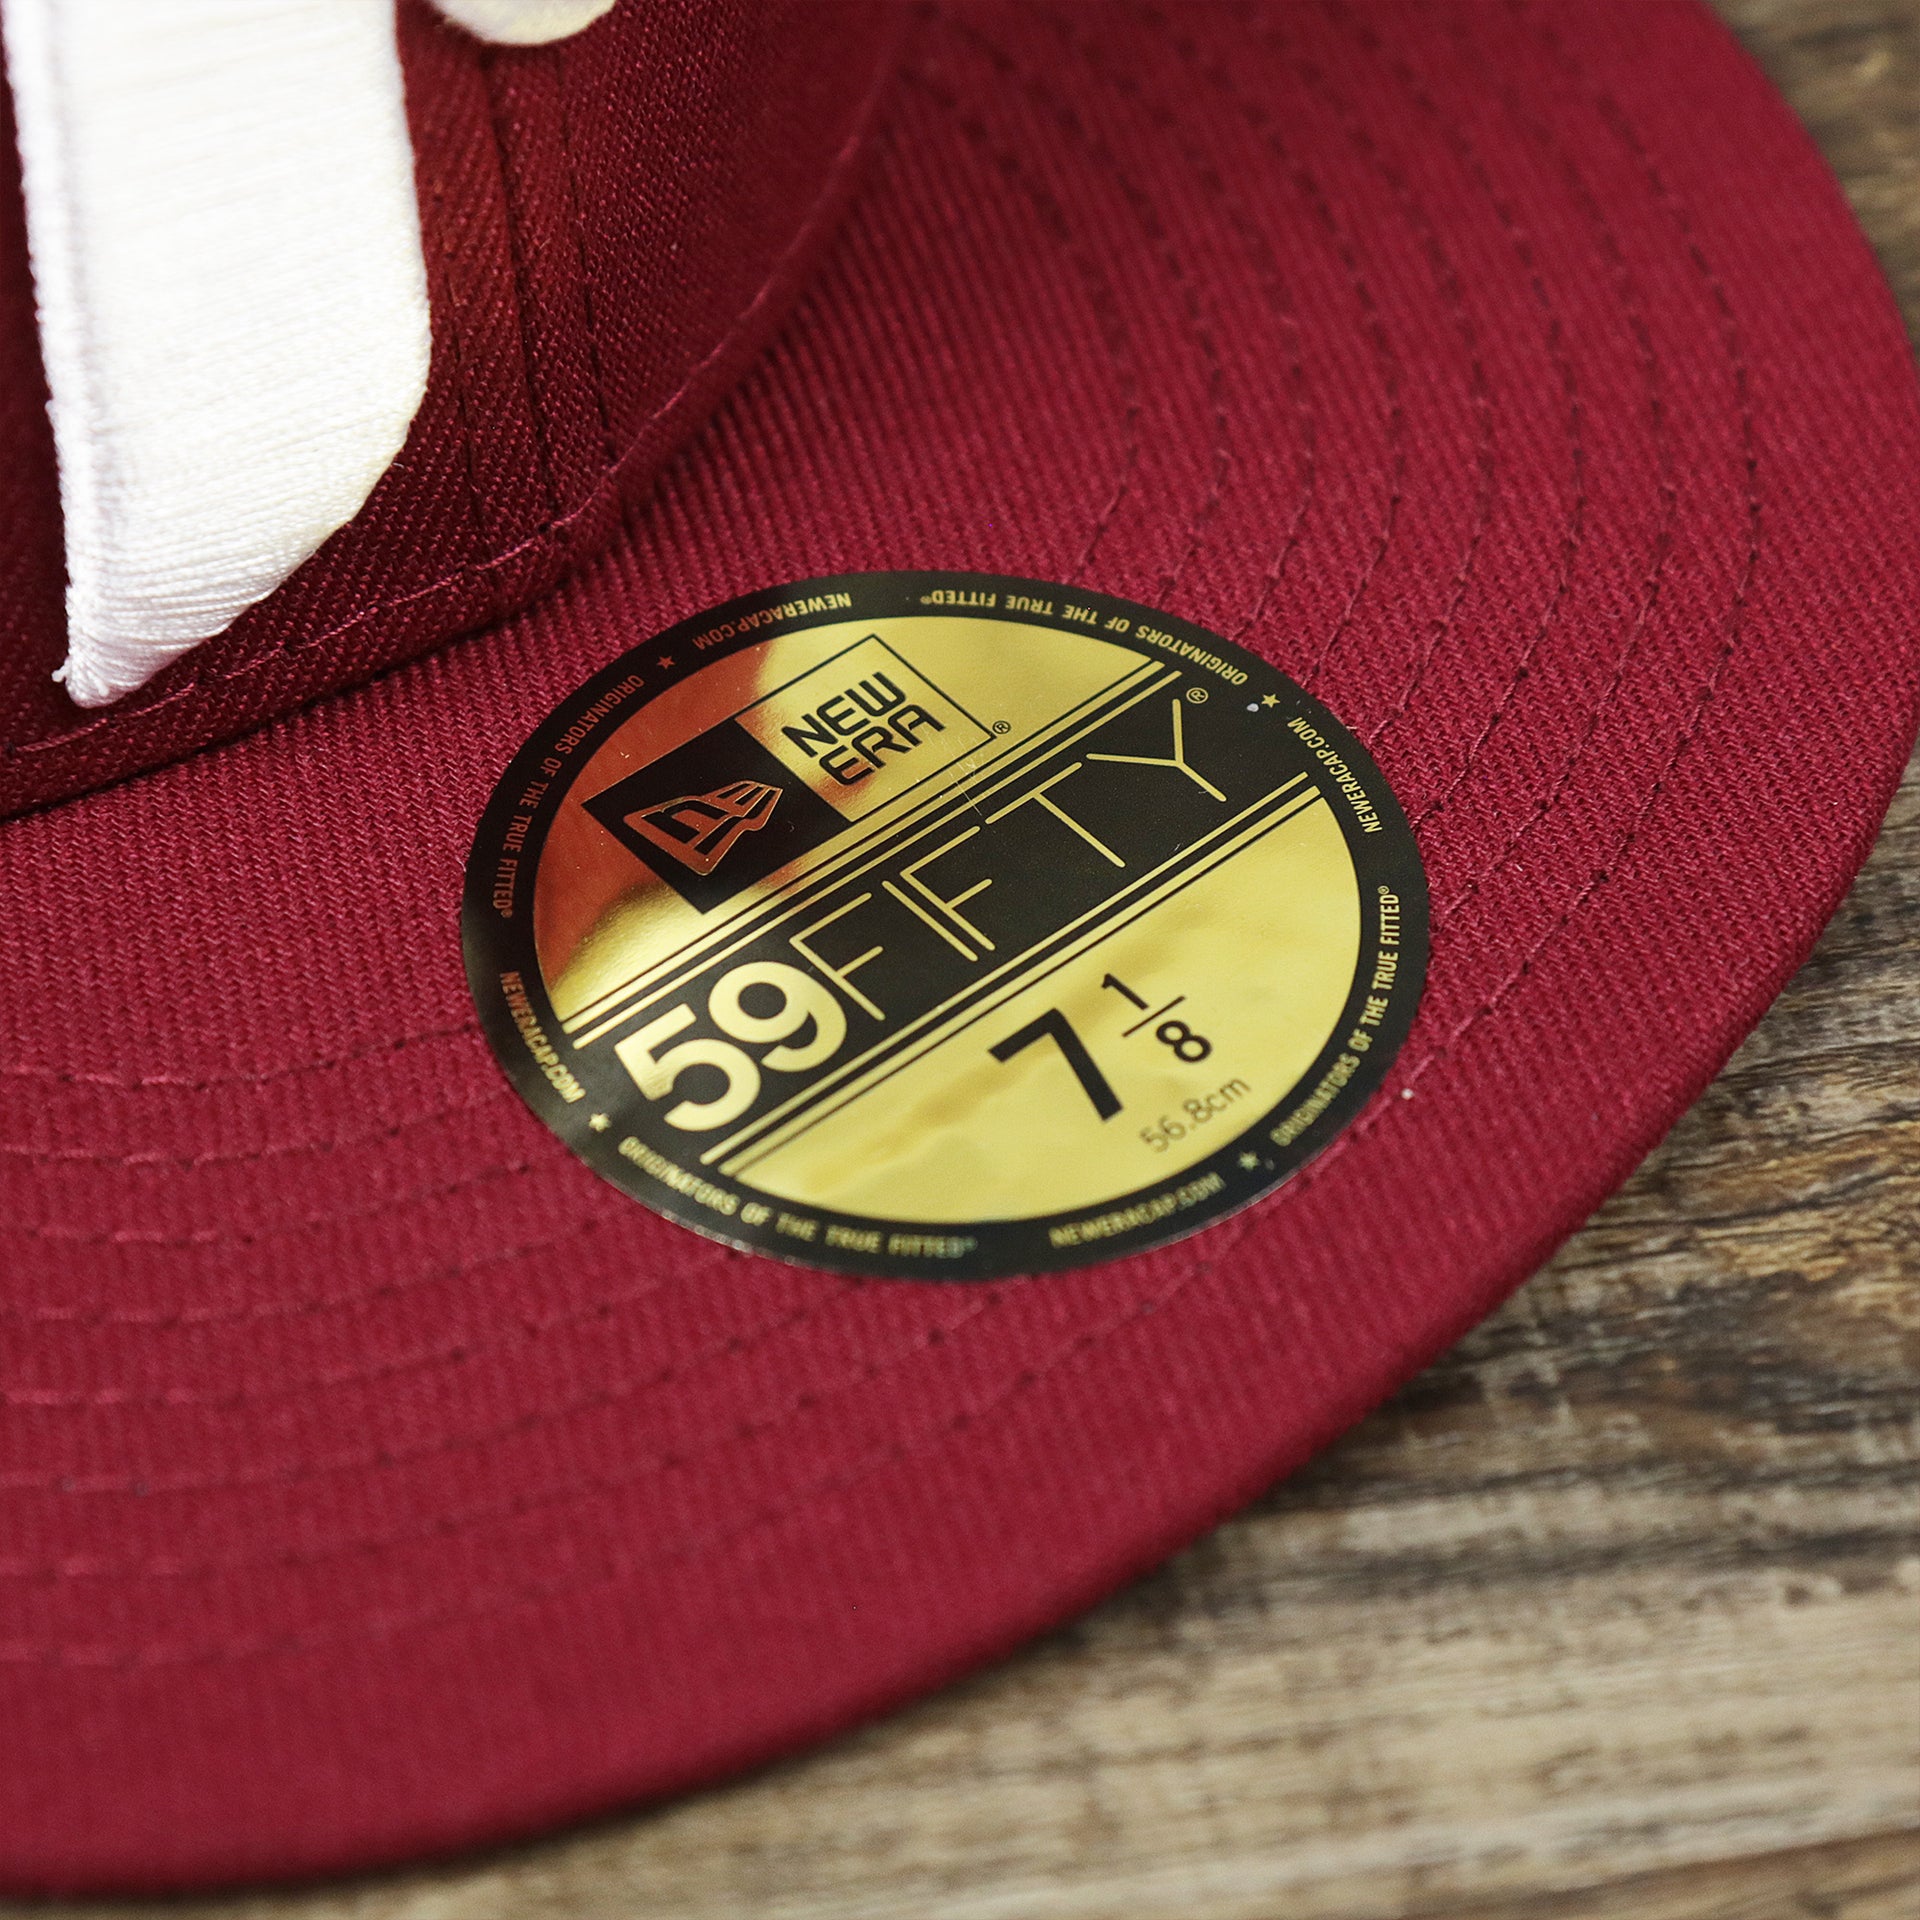 The 59Fifty Sticker on the Cooperstown Philadelphia Phillies Crown Champions Gray Bottom World Championship Wins Embroidered Fitted Cap | Maroon 59Fifty Cap